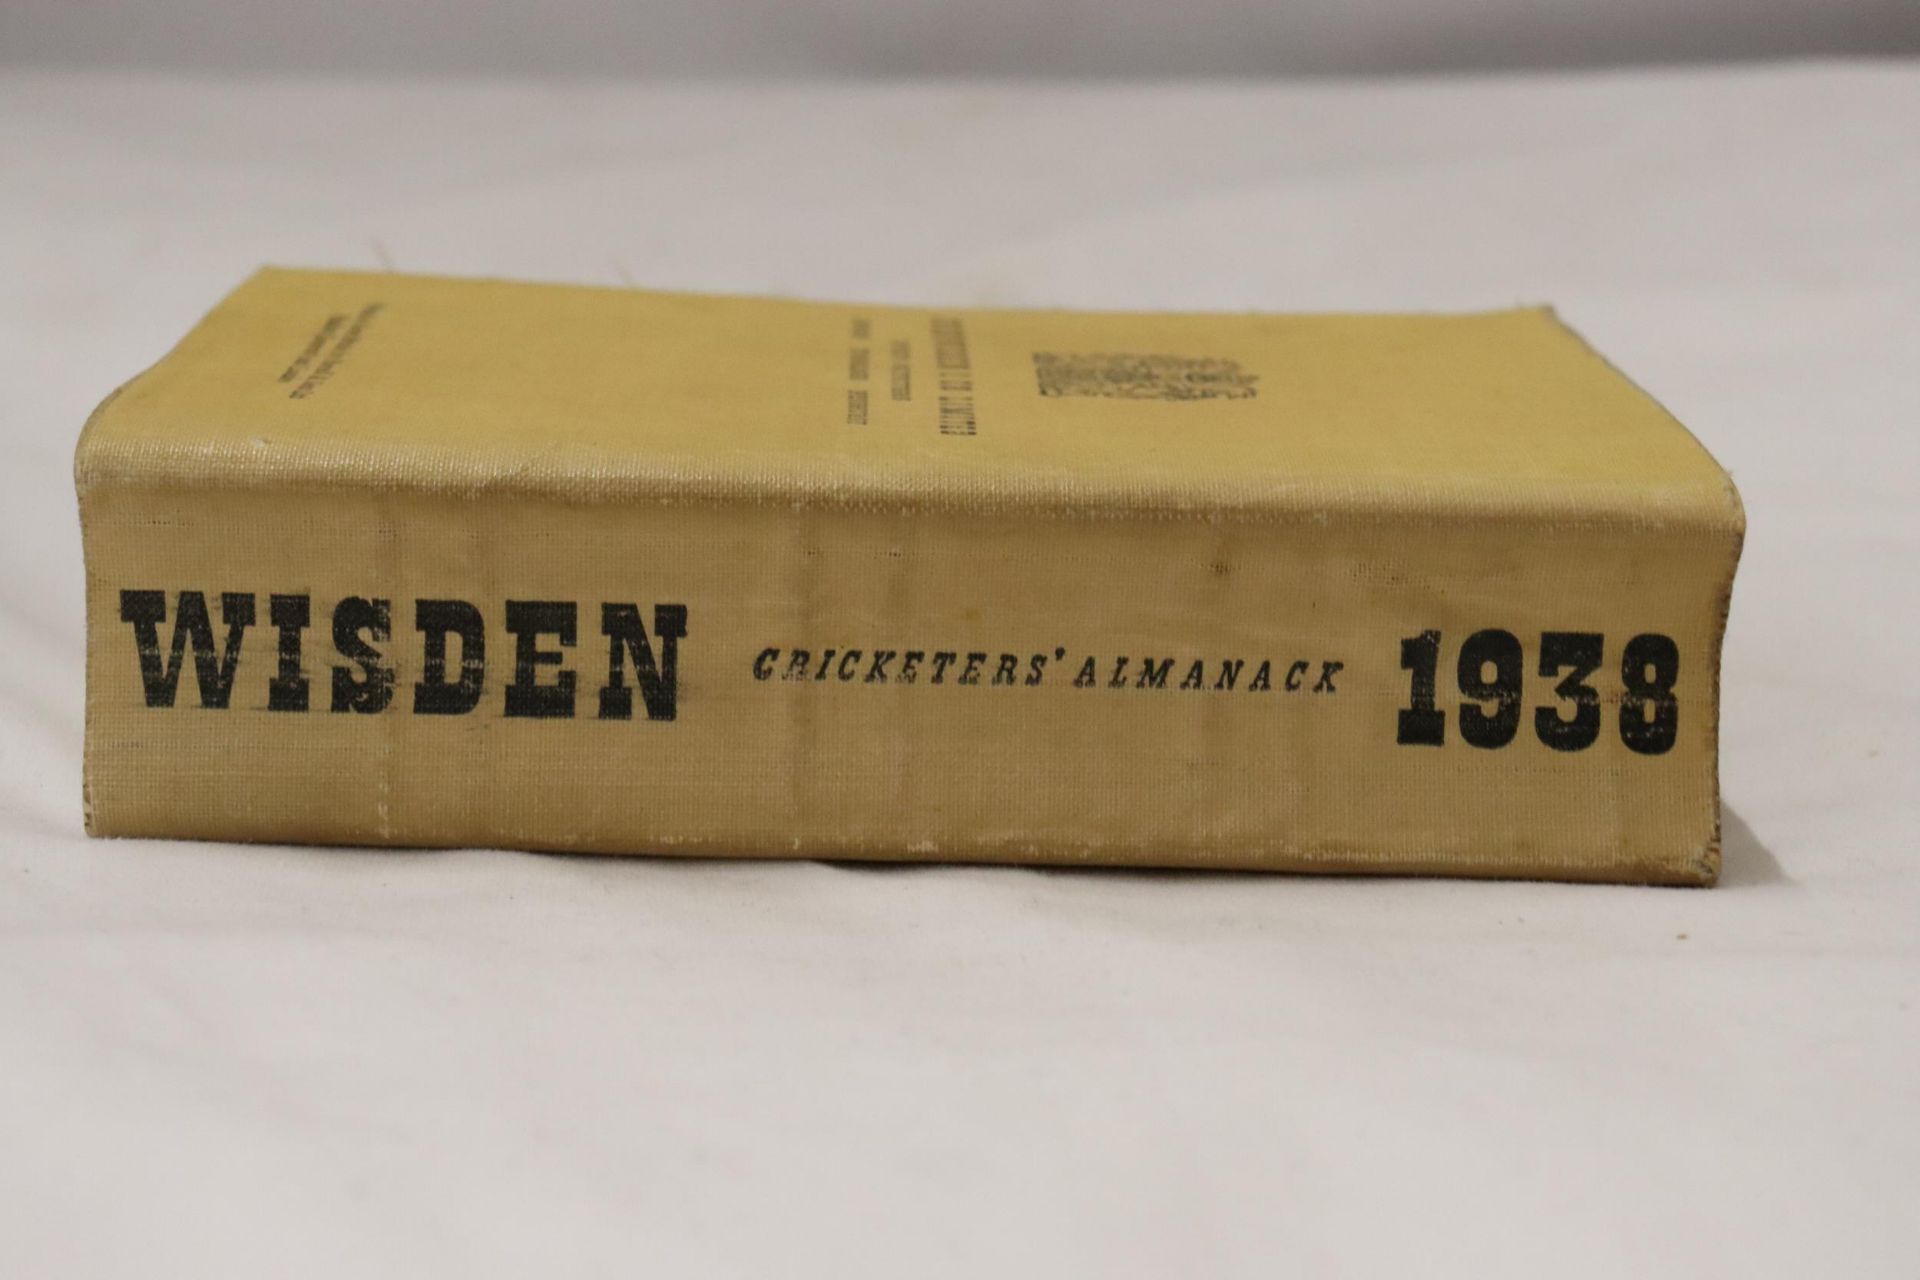 A 1938 COPY OF WISDEN'S CRICKETER'S ALMANACK. THIS COPY IS IN USED CONDITION, THE SPINE IS INTACT. - Image 2 of 4